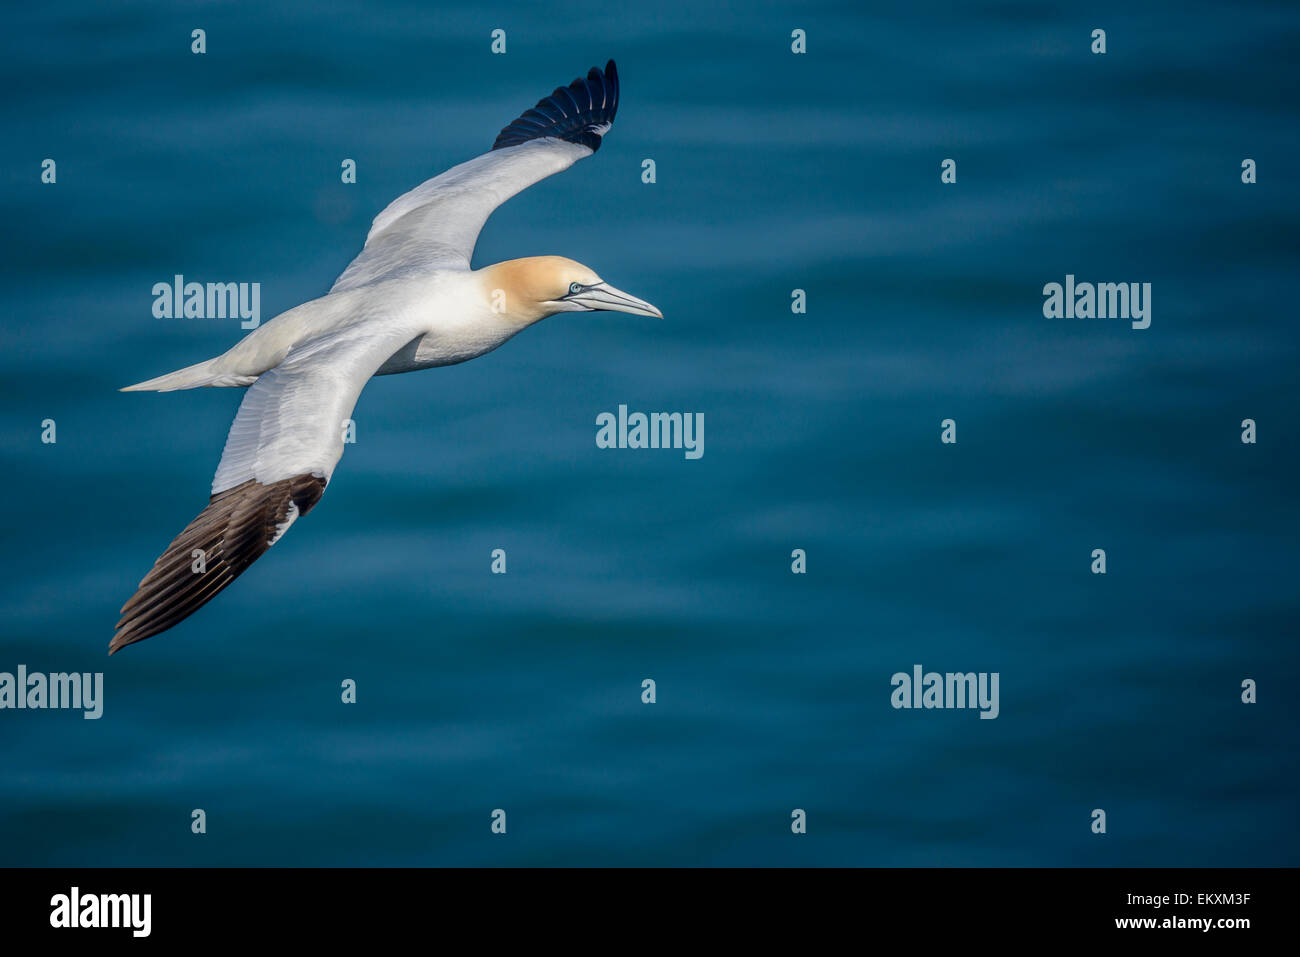 One a northern gannet flying above a blue North Sea. Horizontal format with copyspace. Stock Photo